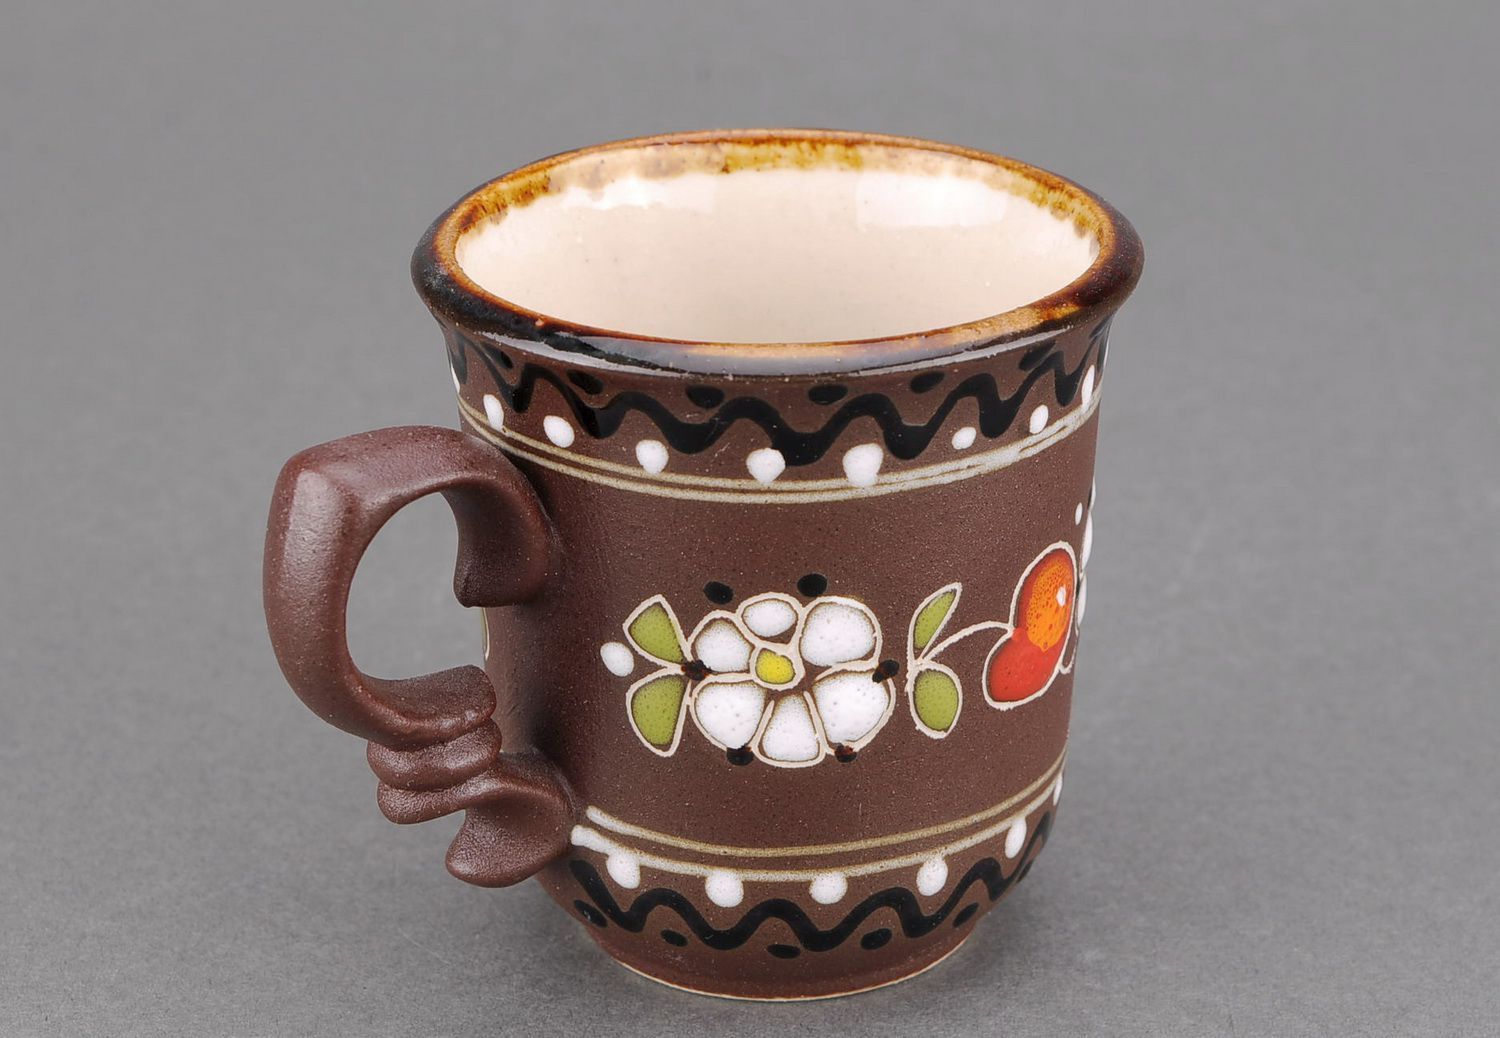 Clay lead-free glazed hand-painted teacup in brown, white, and red color with handle photo 4